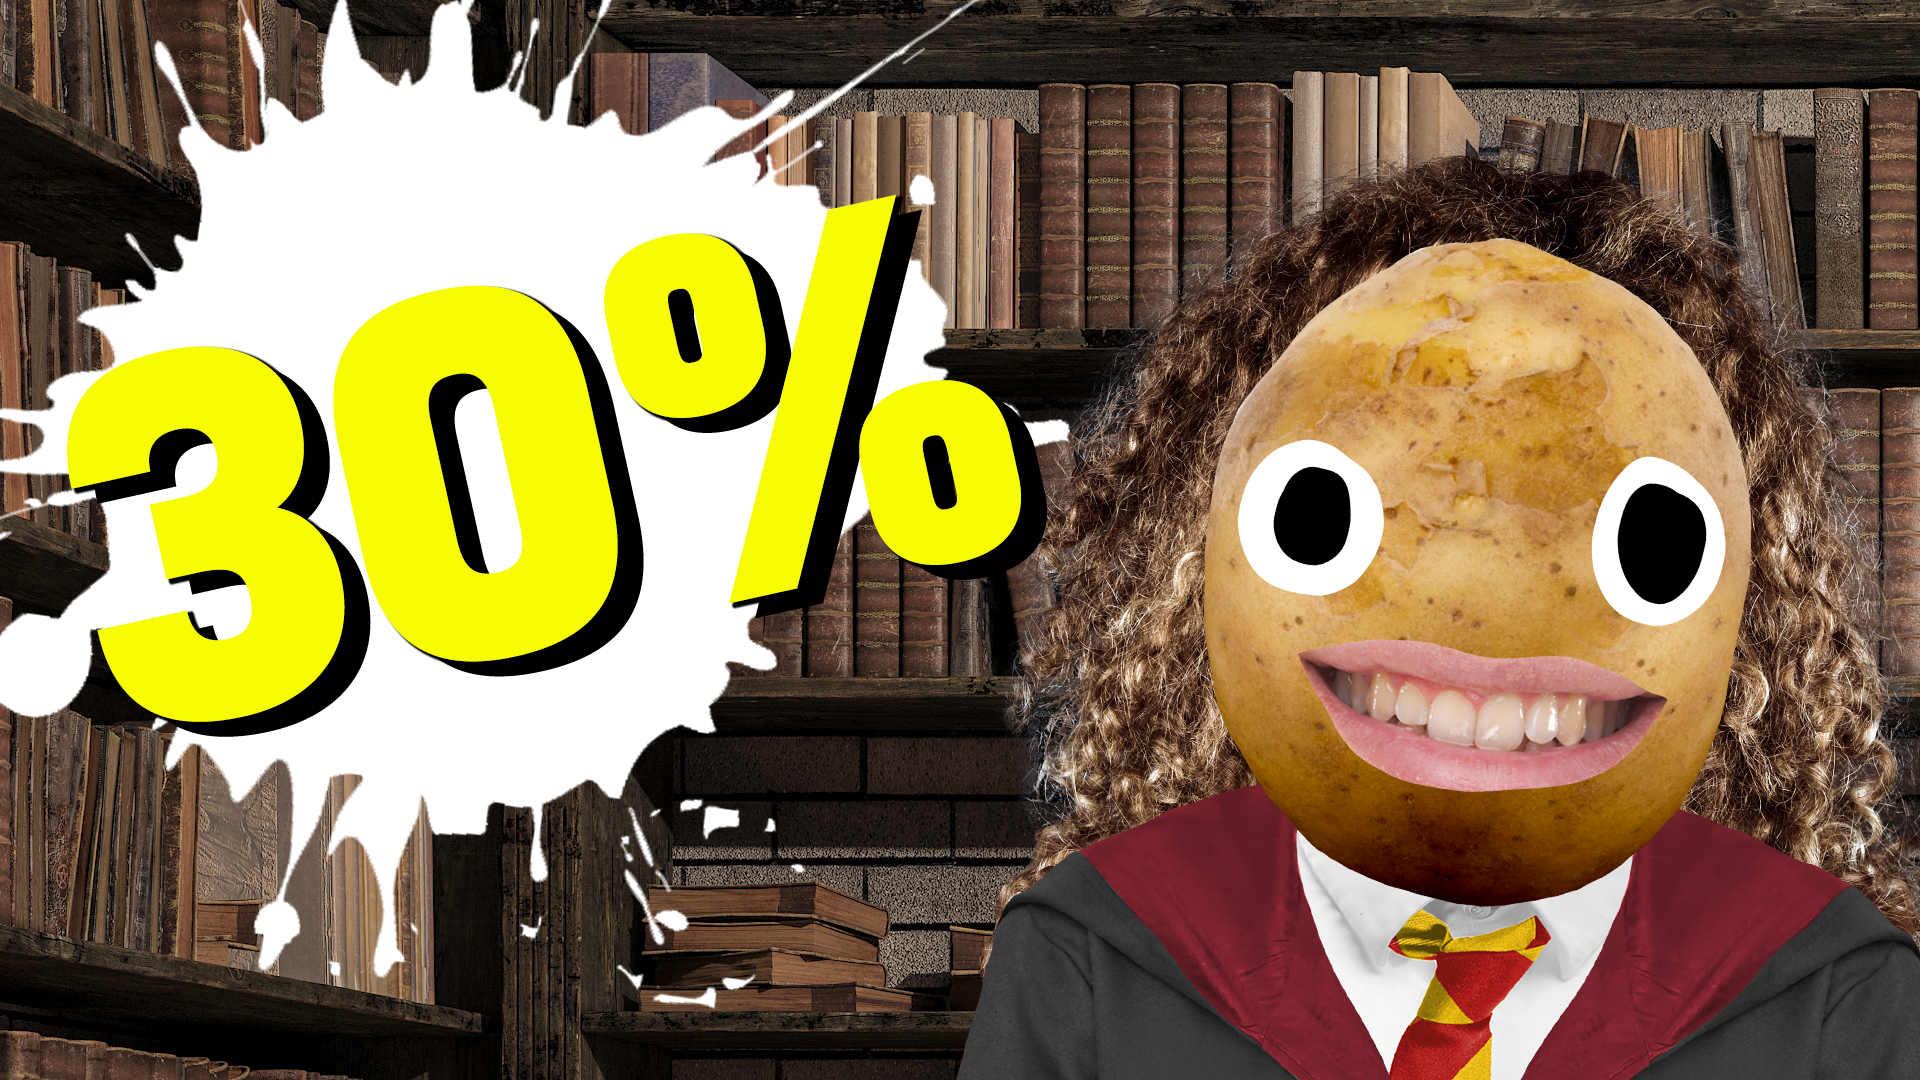 Result: 30 per cent Hermione